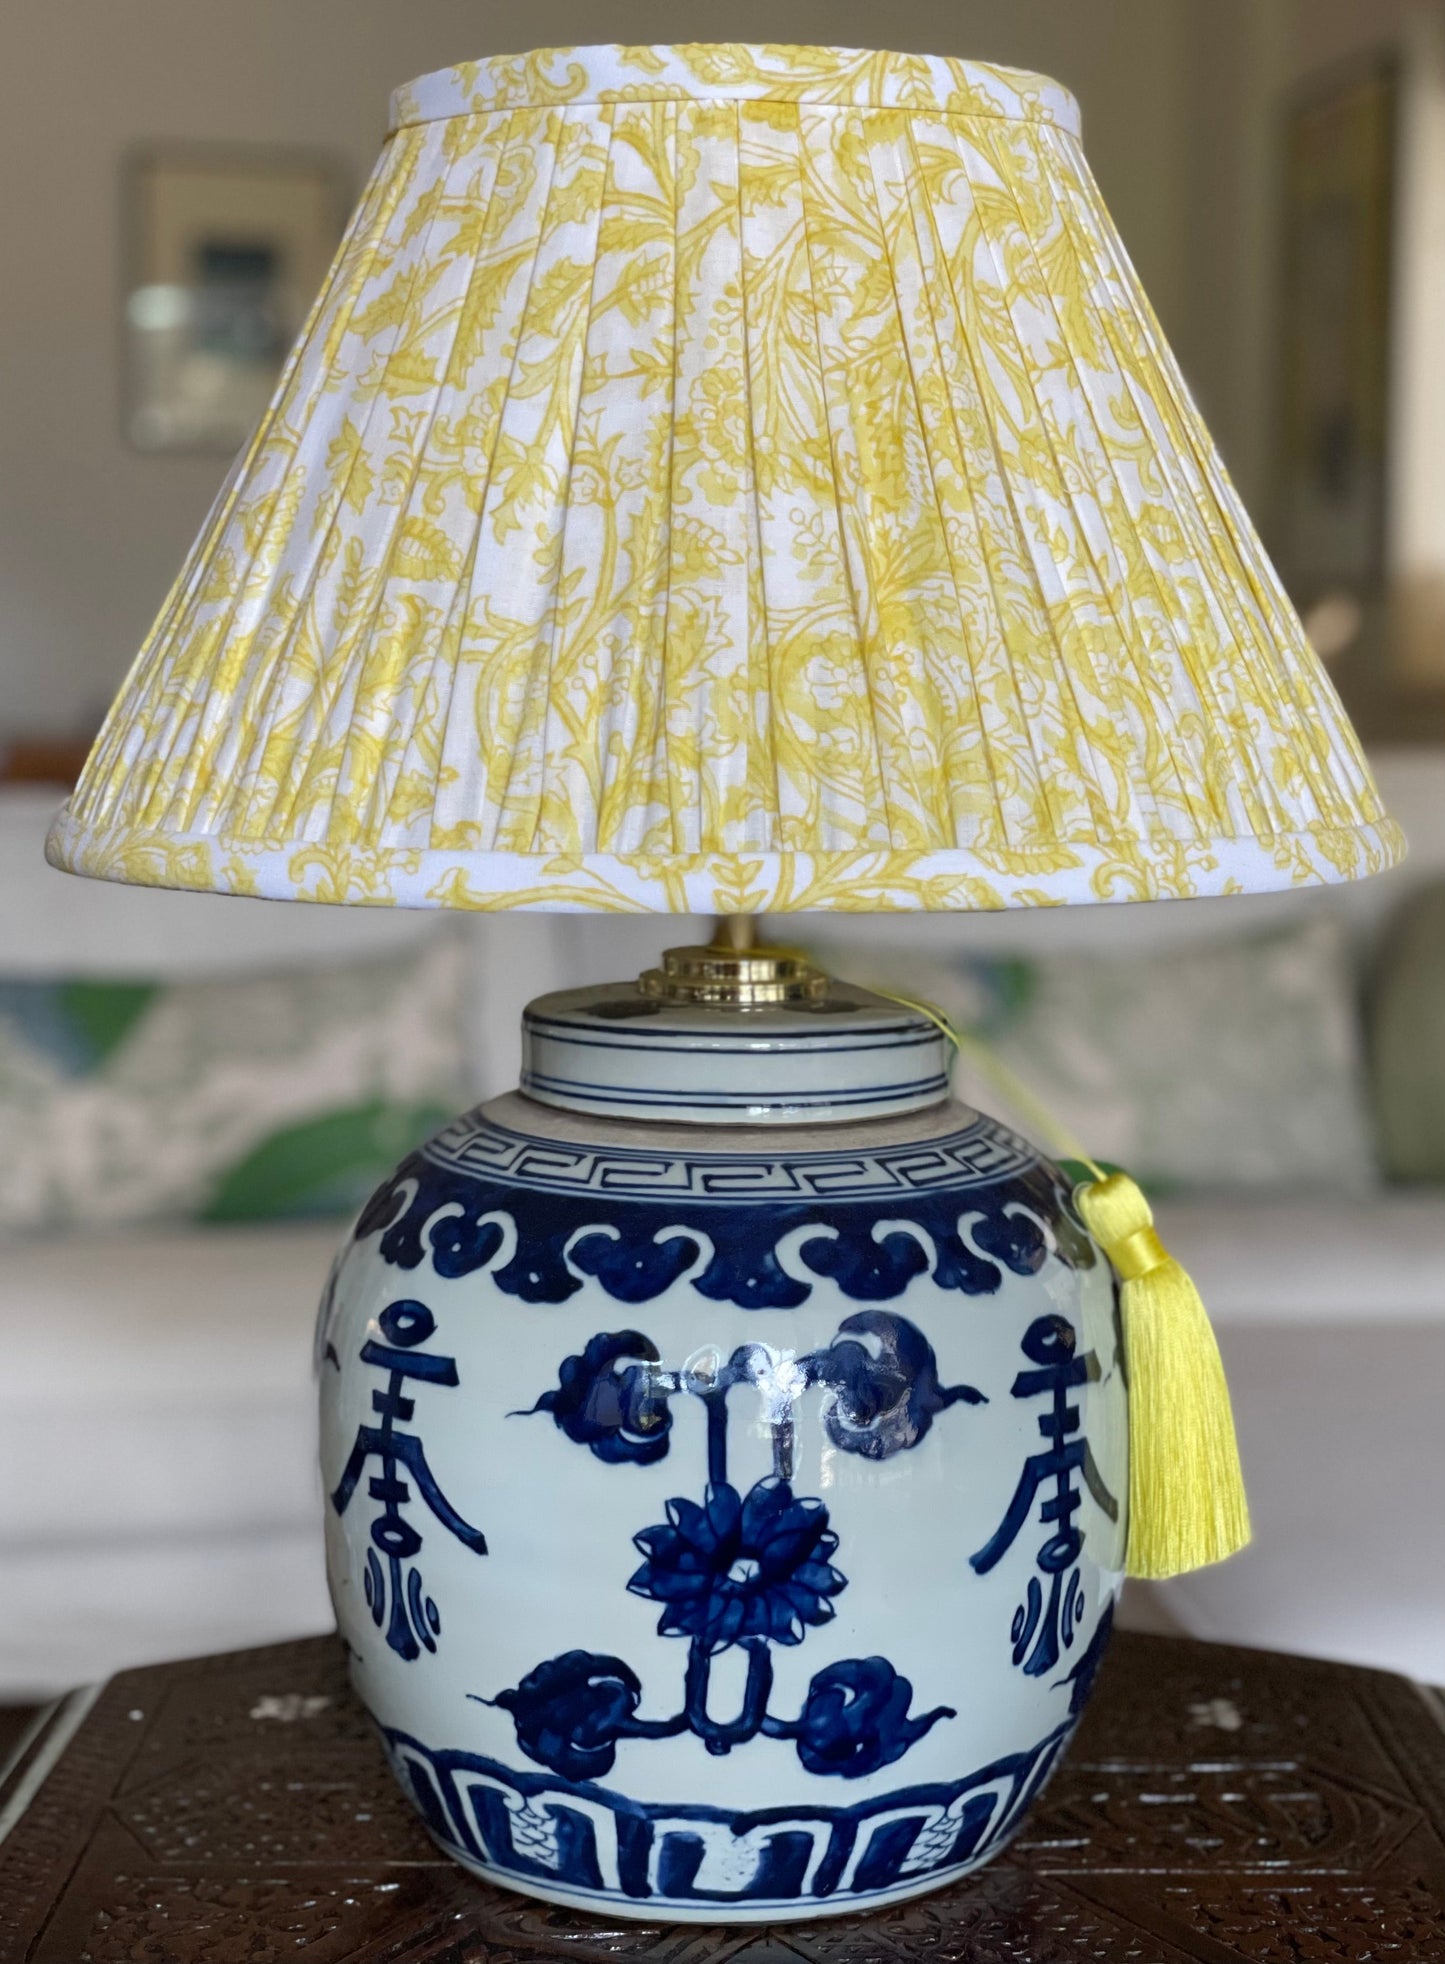 Buttercup Block-Print Cotton Gathered Lamp Shade with Shou base